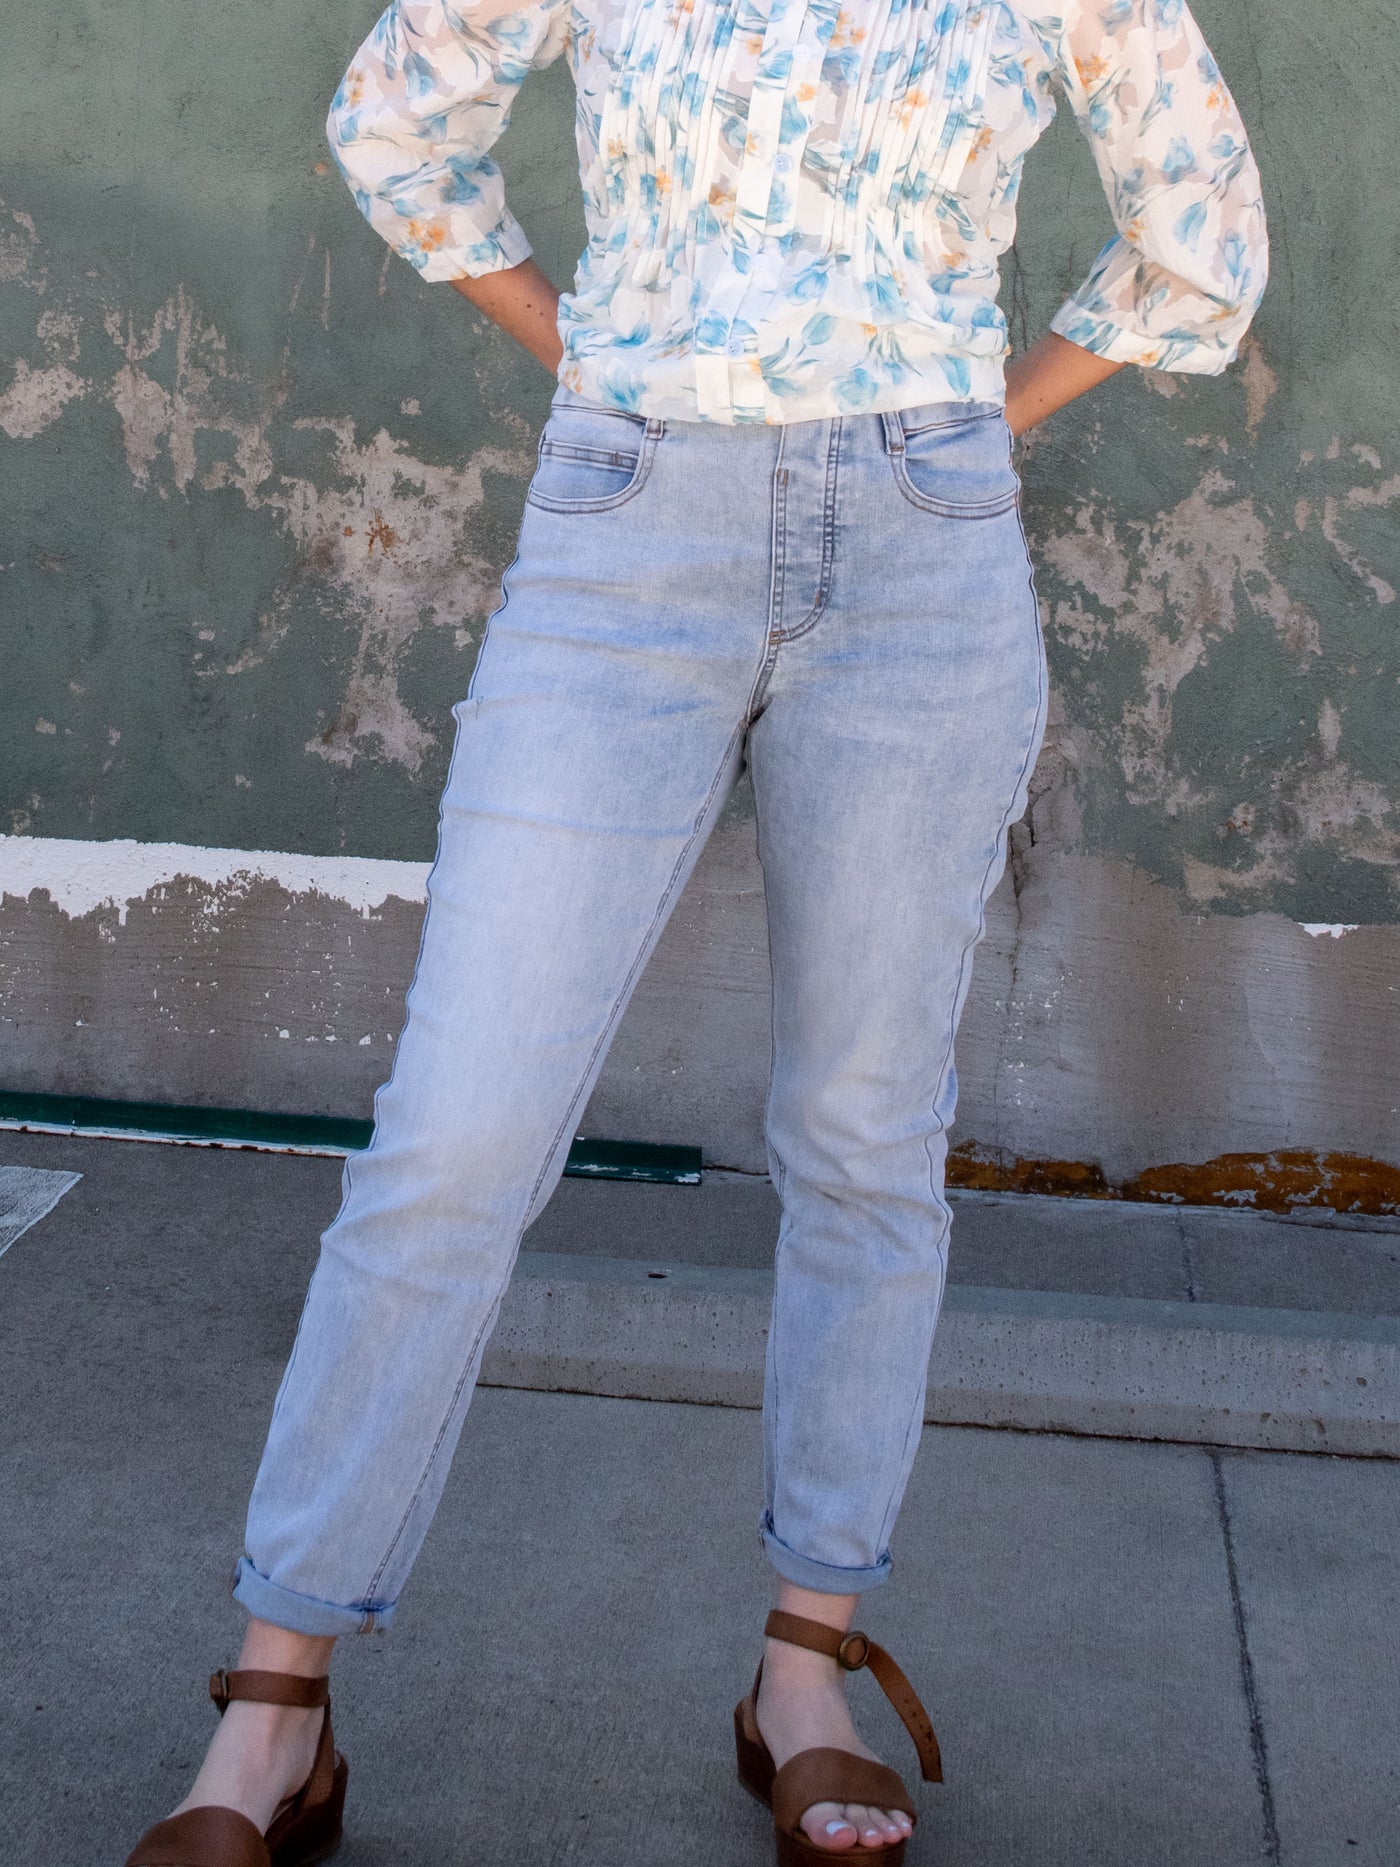 A model wearing a pair of light wash pull on leggings with a floral blouse and brown platform sandals.